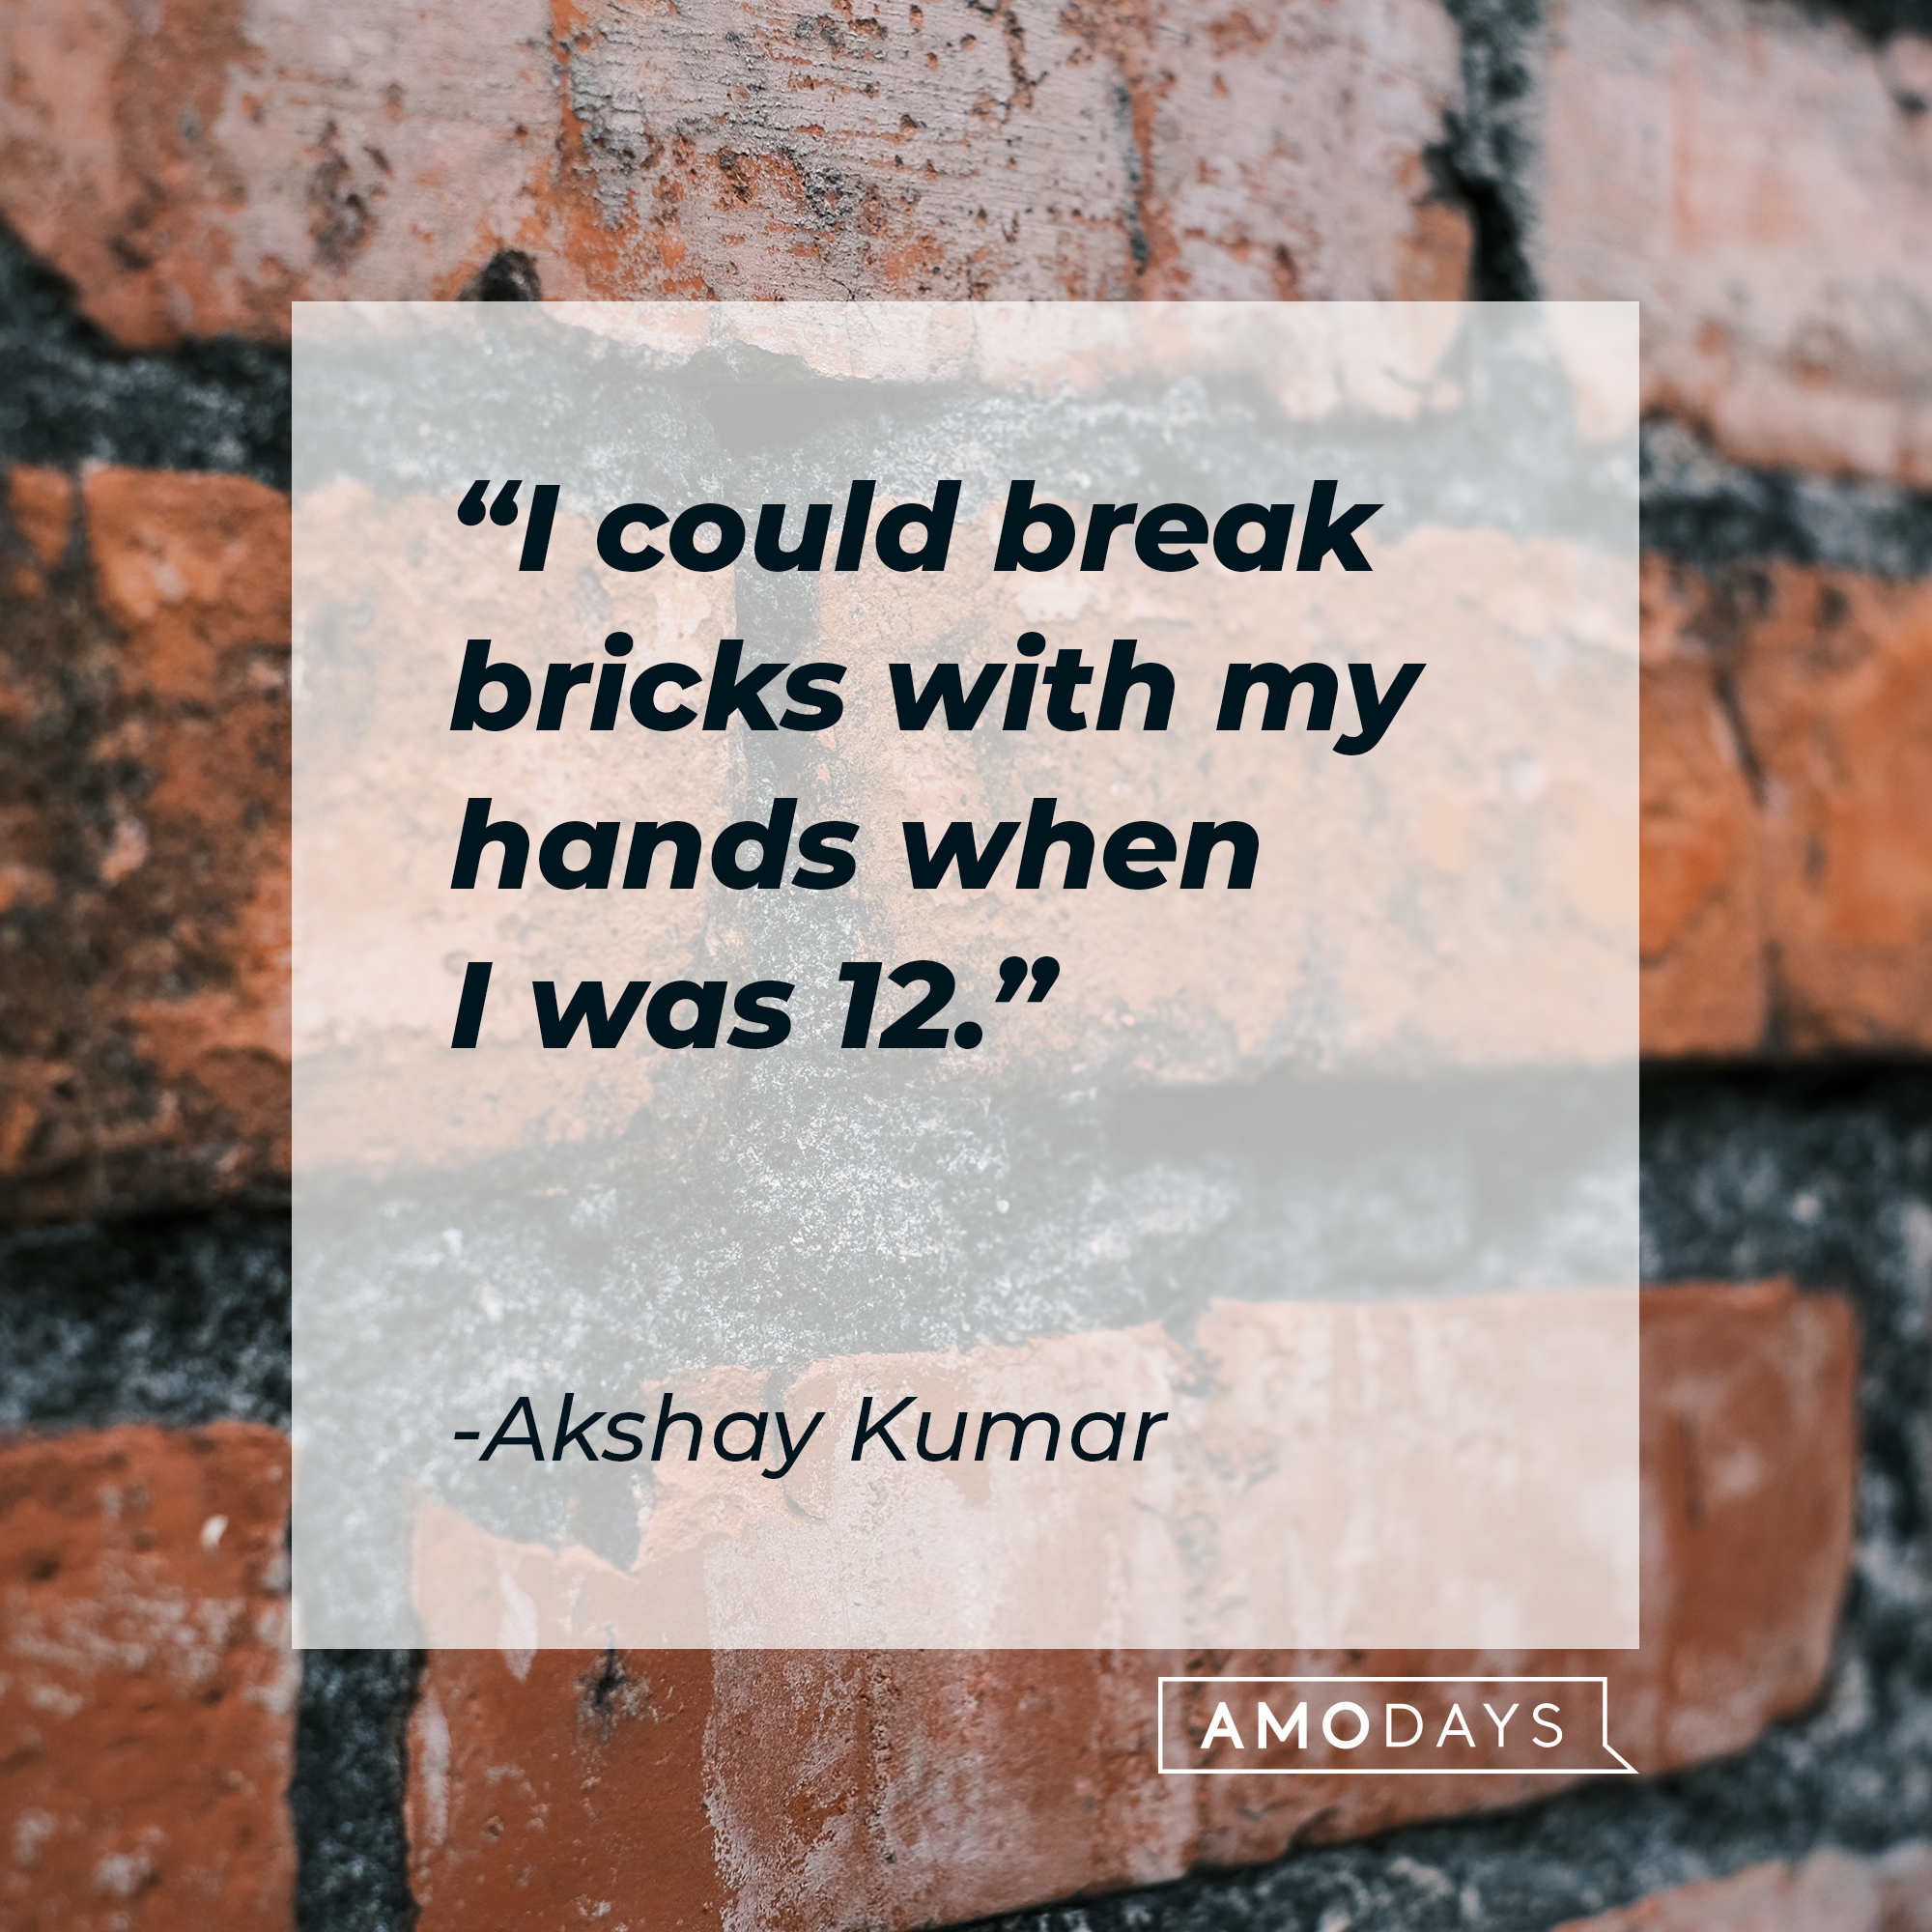 Akshay Kumar's quote: "I could break bricks with my hands when I was 12." | Source: Unsplash